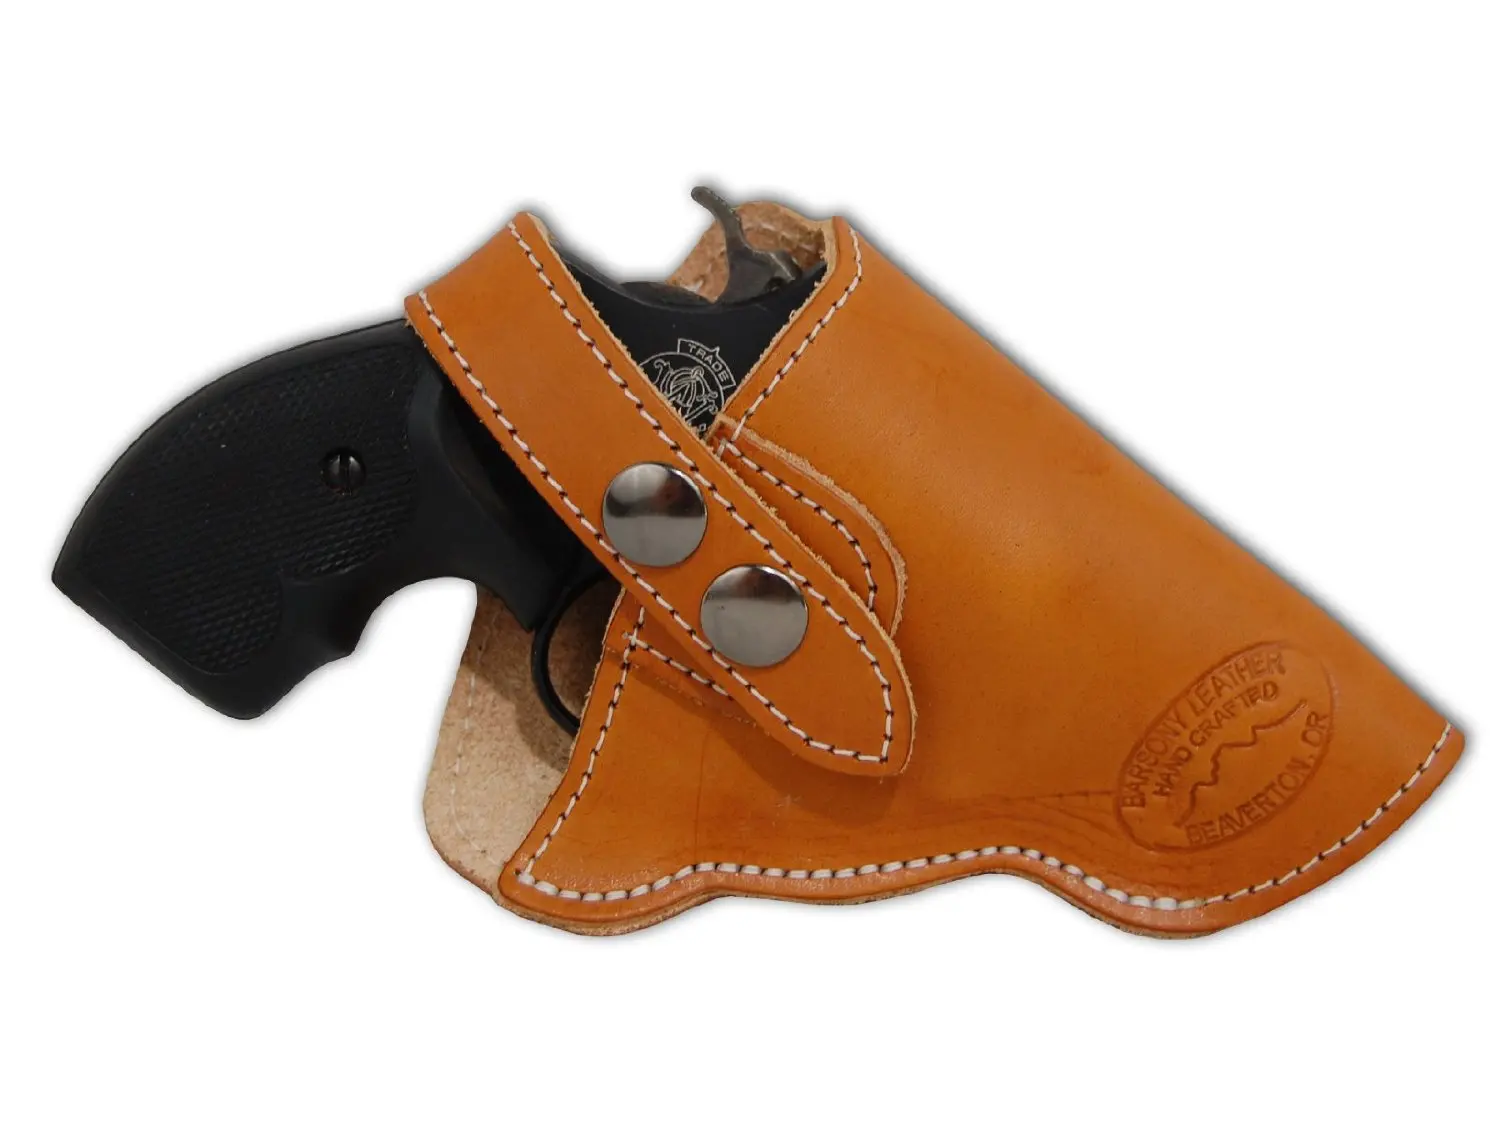 38.99. Barsony Saddle Tan Leather Gun Concealment Holster for Snub-Nose or ...